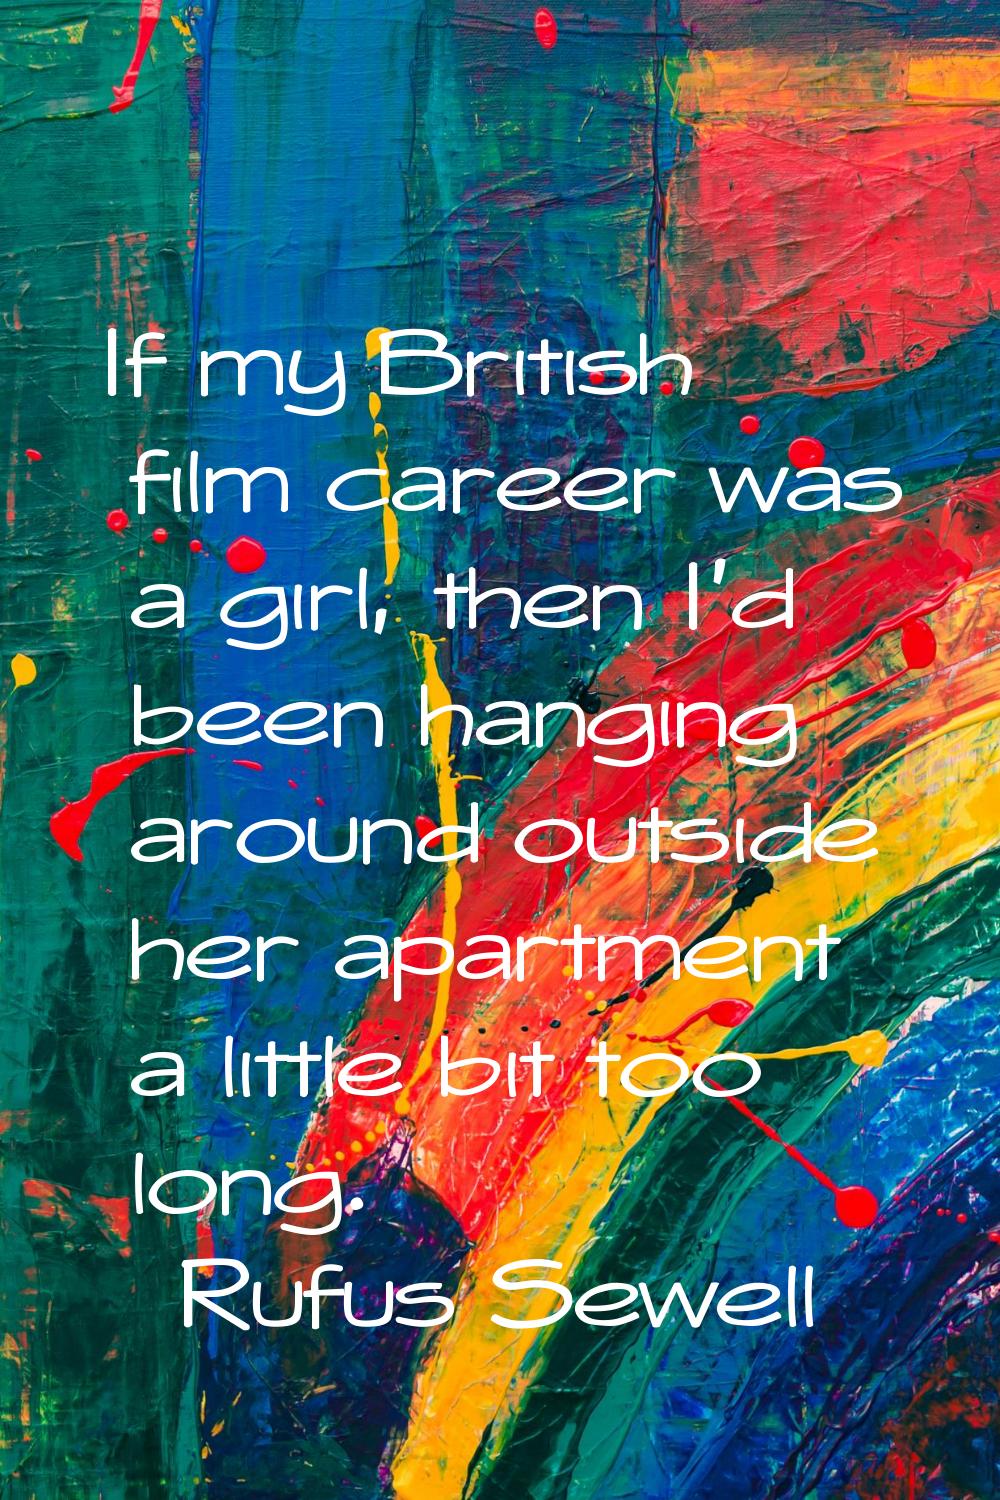 If my British film career was a girl, then I'd been hanging around outside her apartment a little b